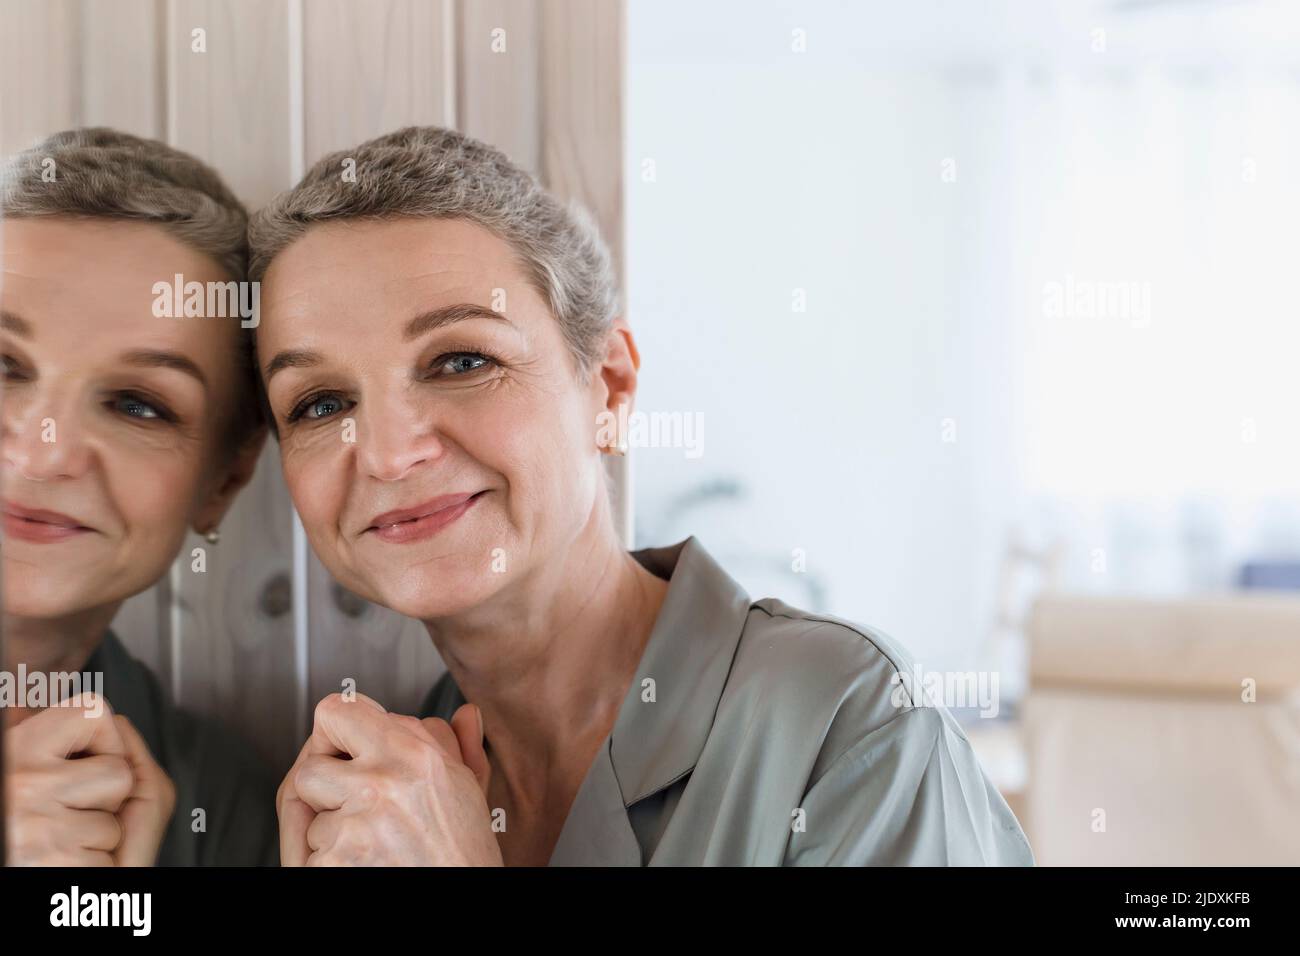 Portrait of mature woman with short grey hair leaning against mirror Stock Photo